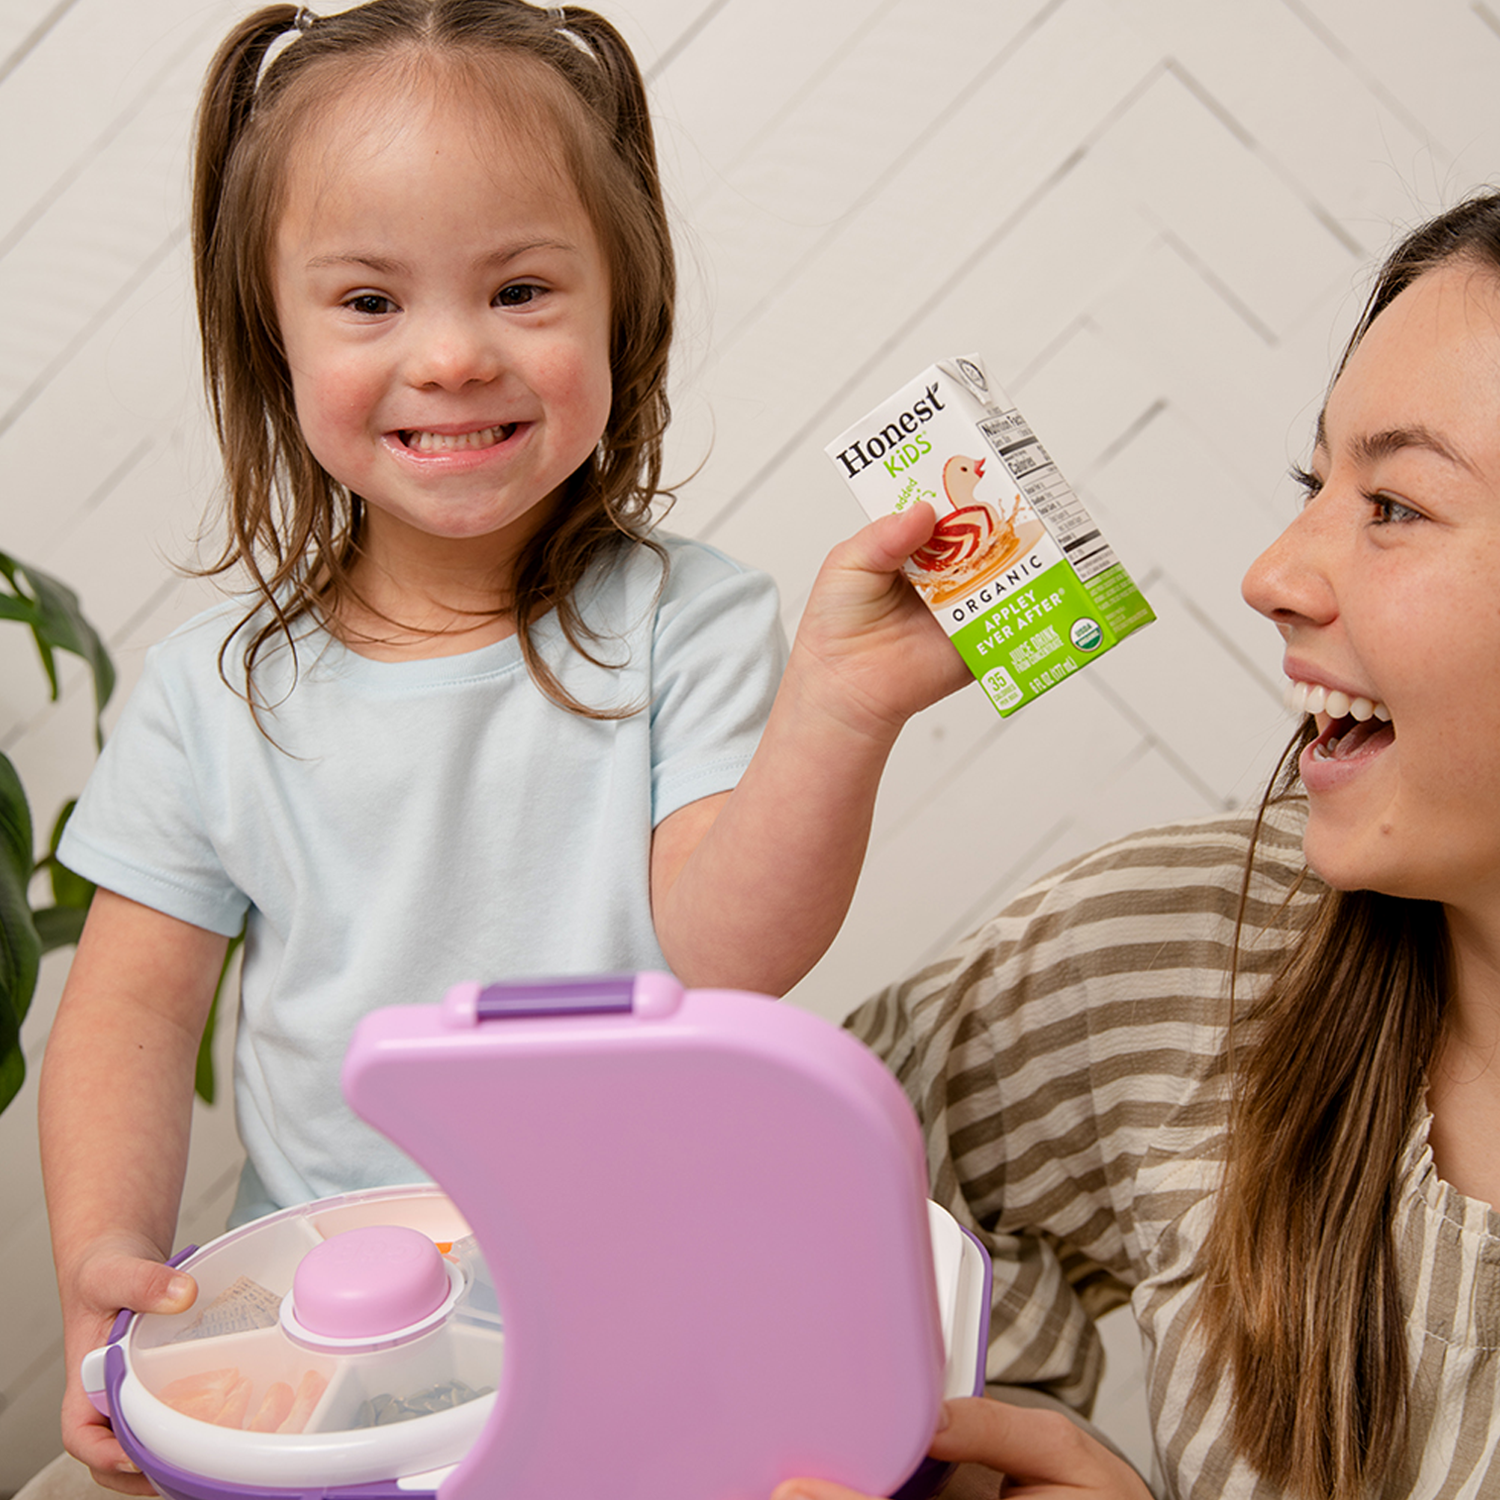 BACK IN STOCK 😍 save to find later! The GoBe Snack Spinner Lunch